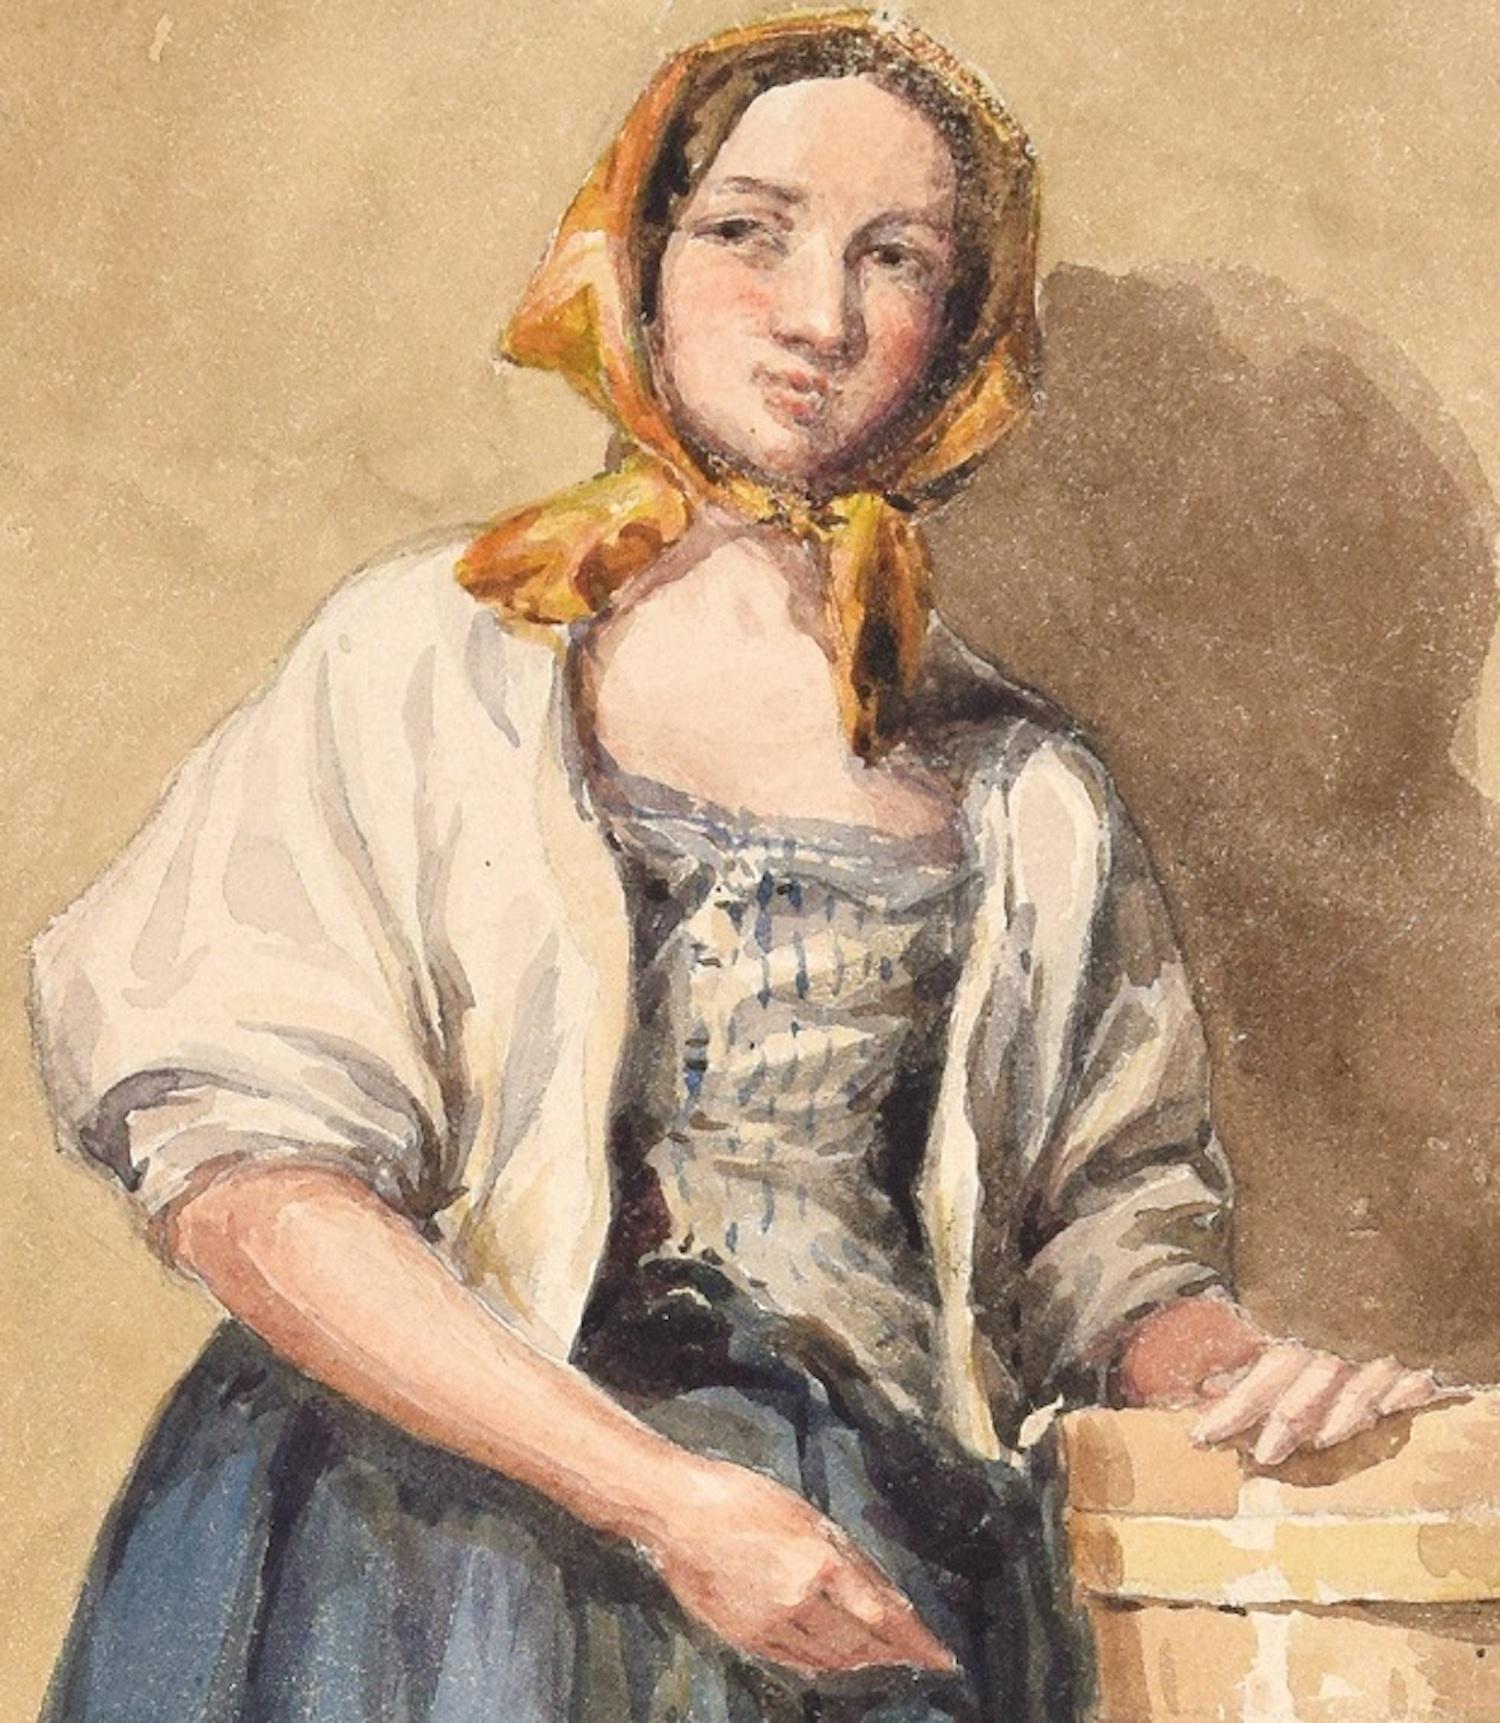 Country Woman -Original Ink and Watercolor by A. Aglio - Early 19th Century - Art by Agostino Aglio